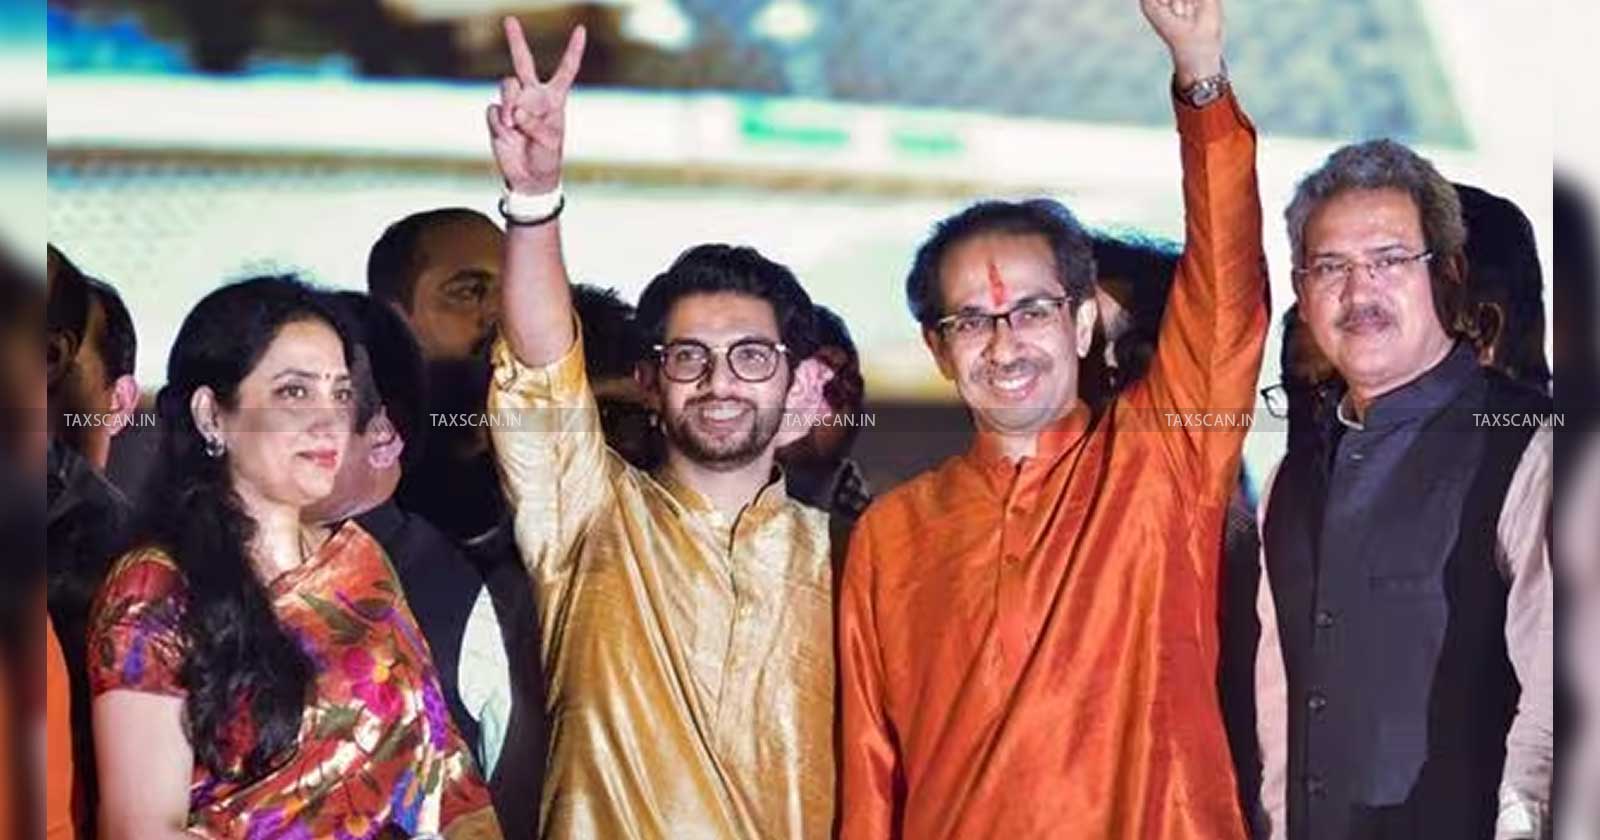 Thackeray Family - Bombay High Court - PIL - ED - Disproportionate Assets - Enforcement Directorate - Taxscan